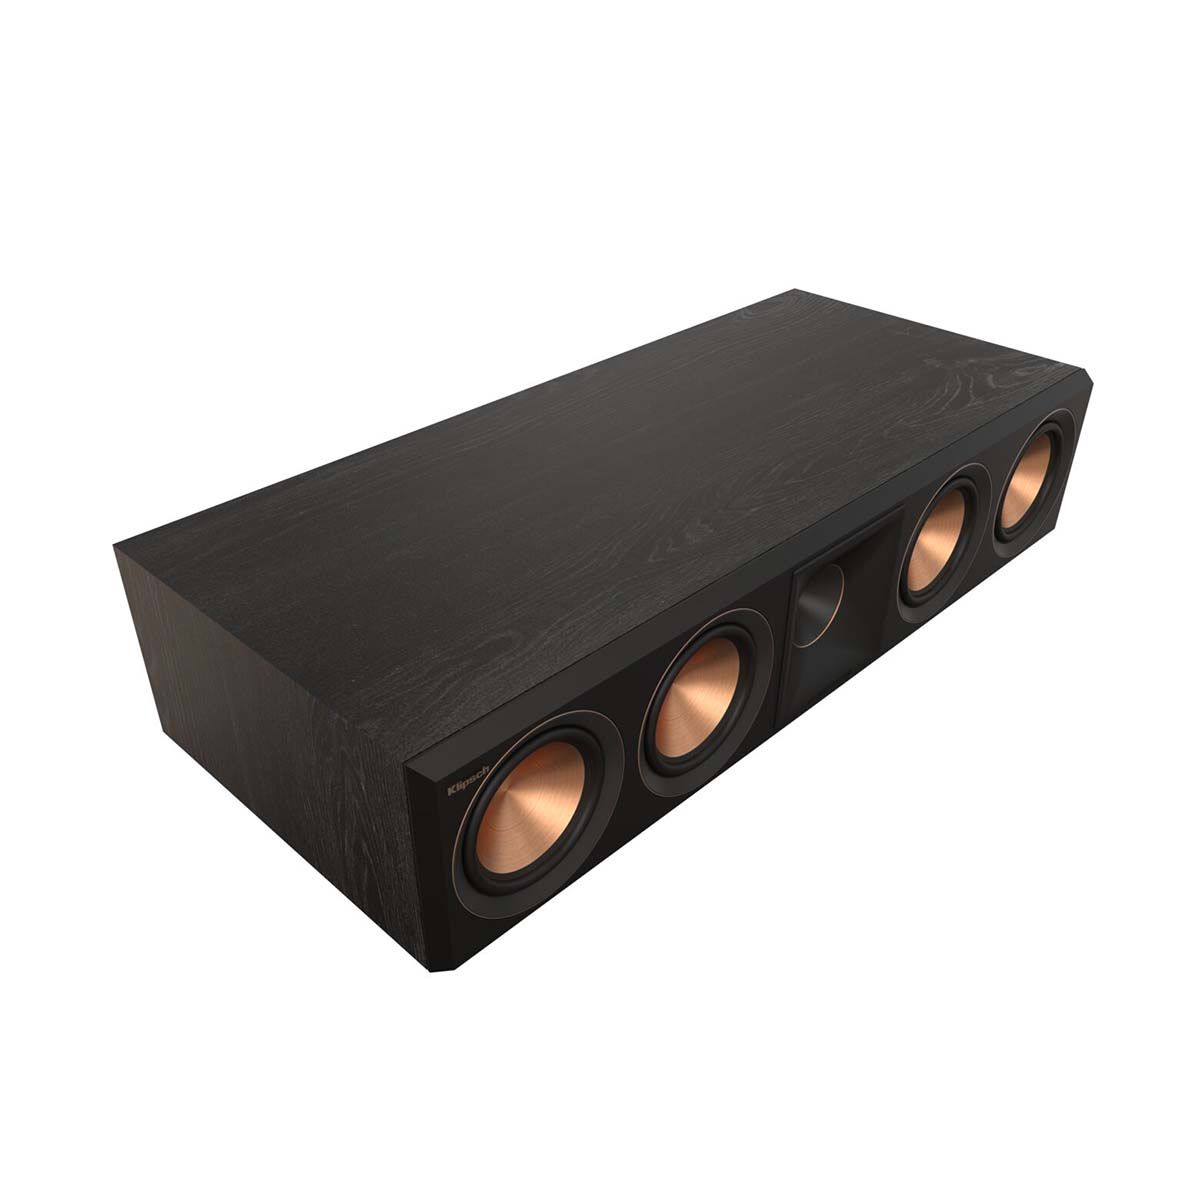 Klipsch RP-504C II Center Channel Speaker - Ebony - top angled front view without grill